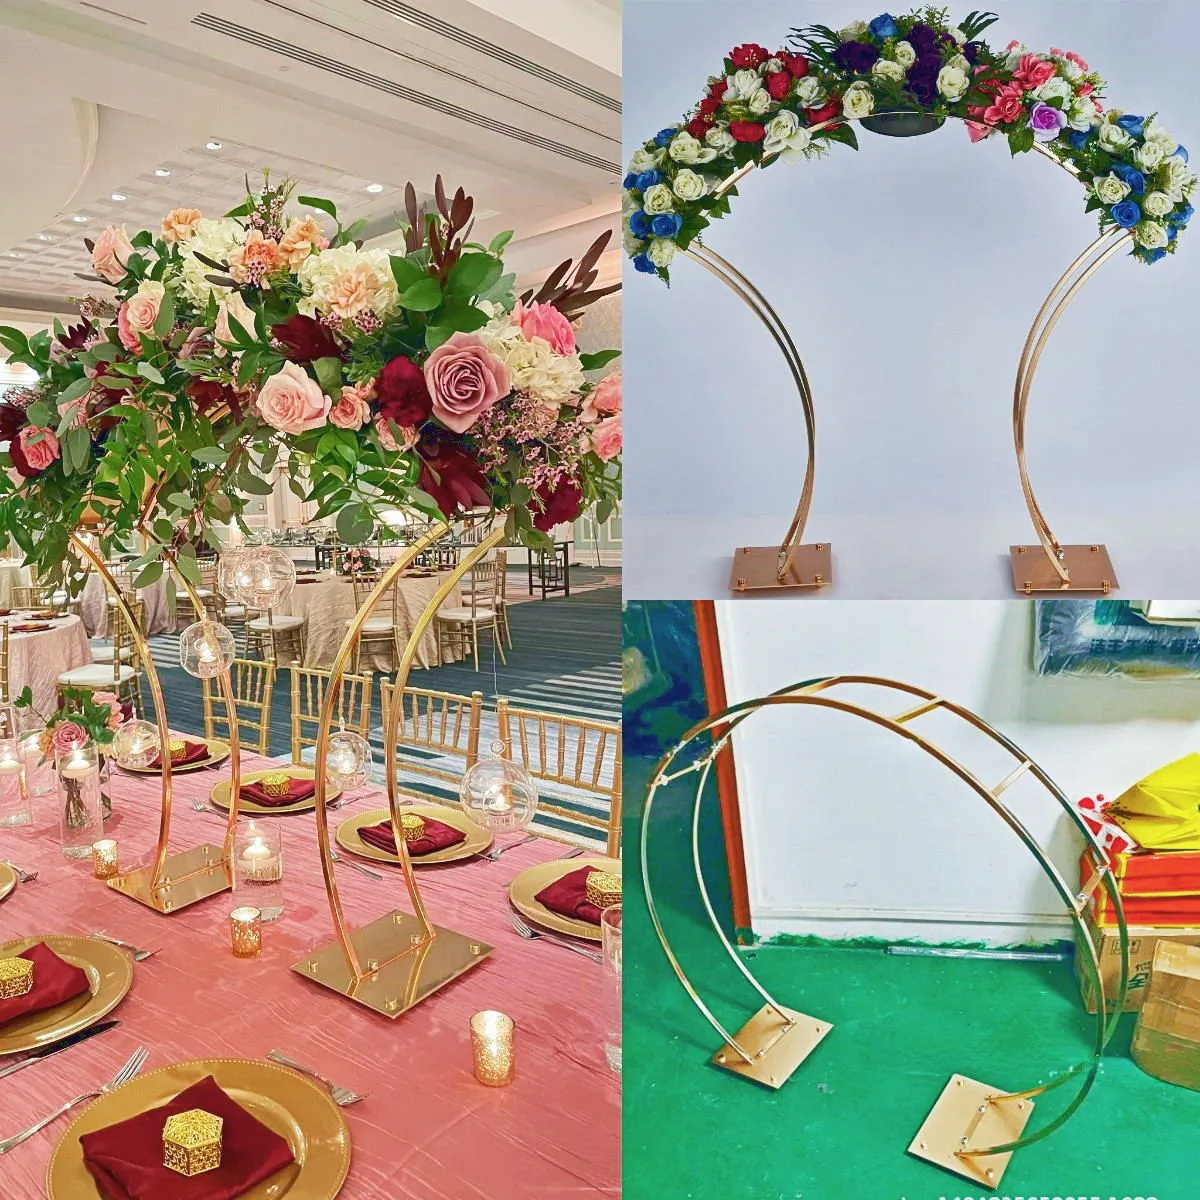 4 Stora bröllopsdekorationsbordet Centerpiece Floral Row Metal Holder Flower Rack Shiny Gold Multi-Style Arch Stand Grand-Event Party Stage Walkway Backdrops Props